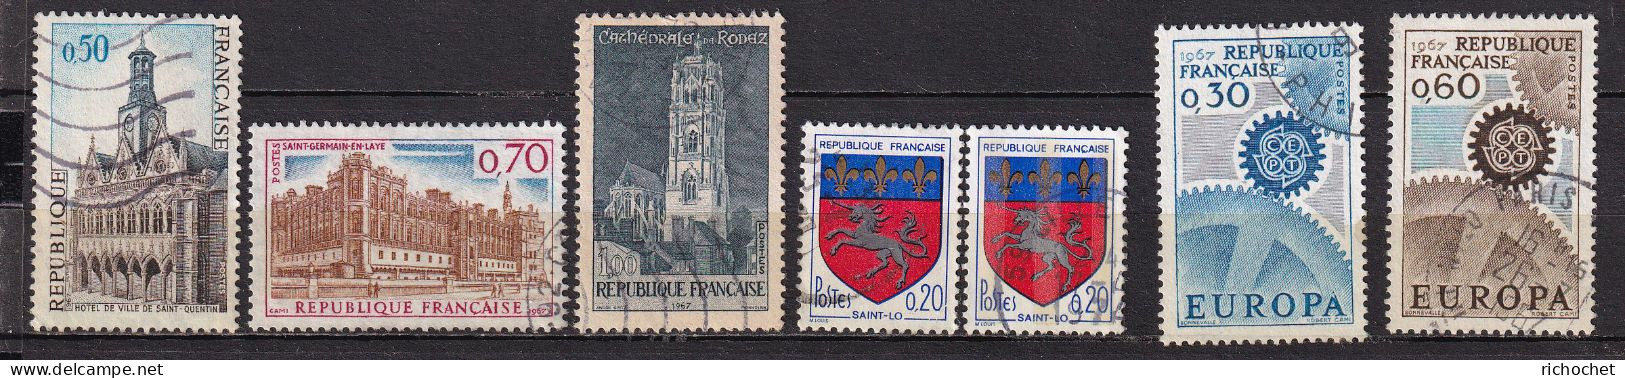 France 1499 + 1501 + 1504 + 1510 + 1510c + 1521 + 1522  ° - Used Stamps